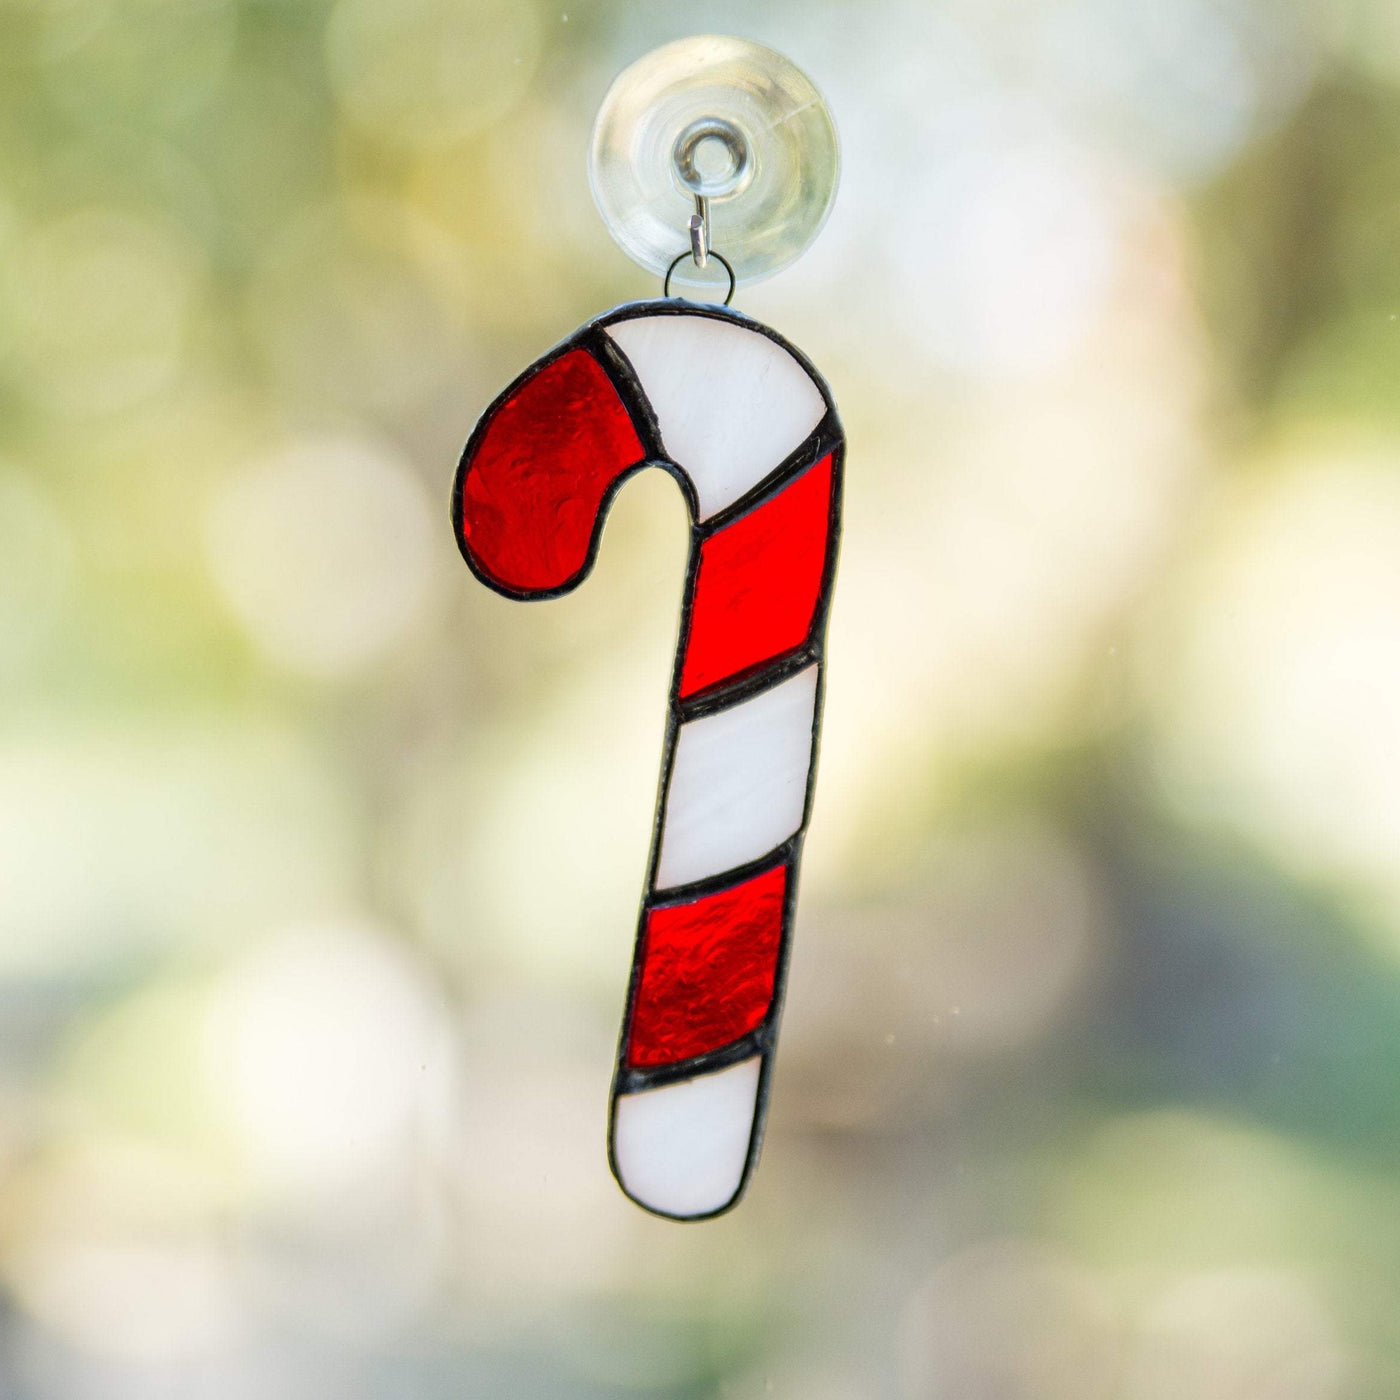 Stained glass candy cane suncatcher for Christmas decor